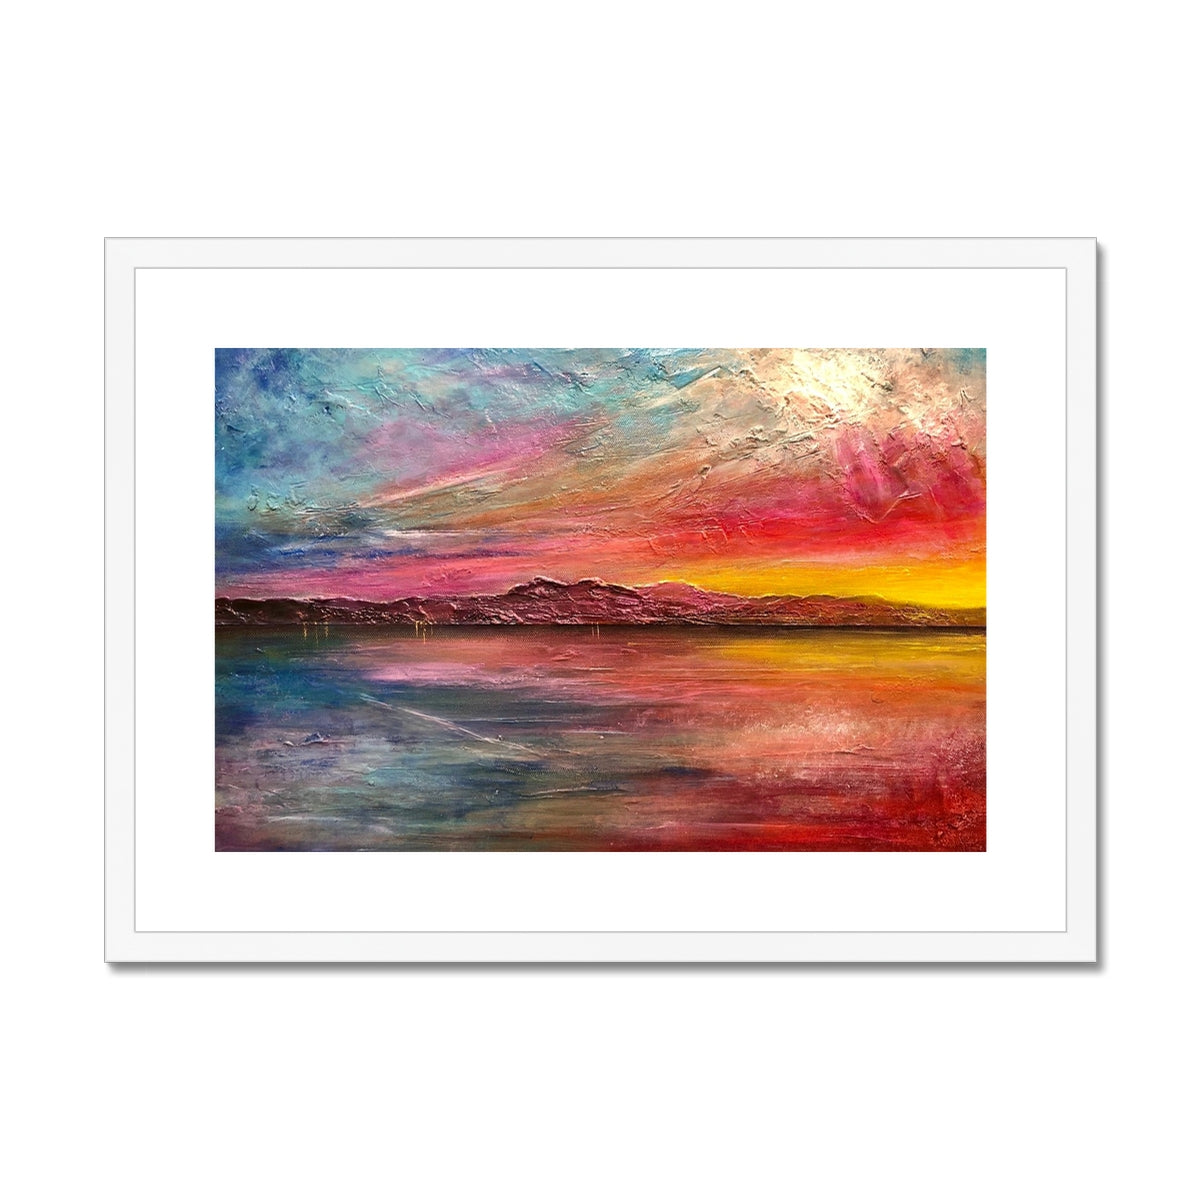 Arran Sunset ii Painting | Framed & Mounted Prints From Scotland-Framed & Mounted Prints-Arran Art Gallery-A2 Landscape-White Frame-Paintings, Prints, Homeware, Art Gifts From Scotland By Scottish Artist Kevin Hunter